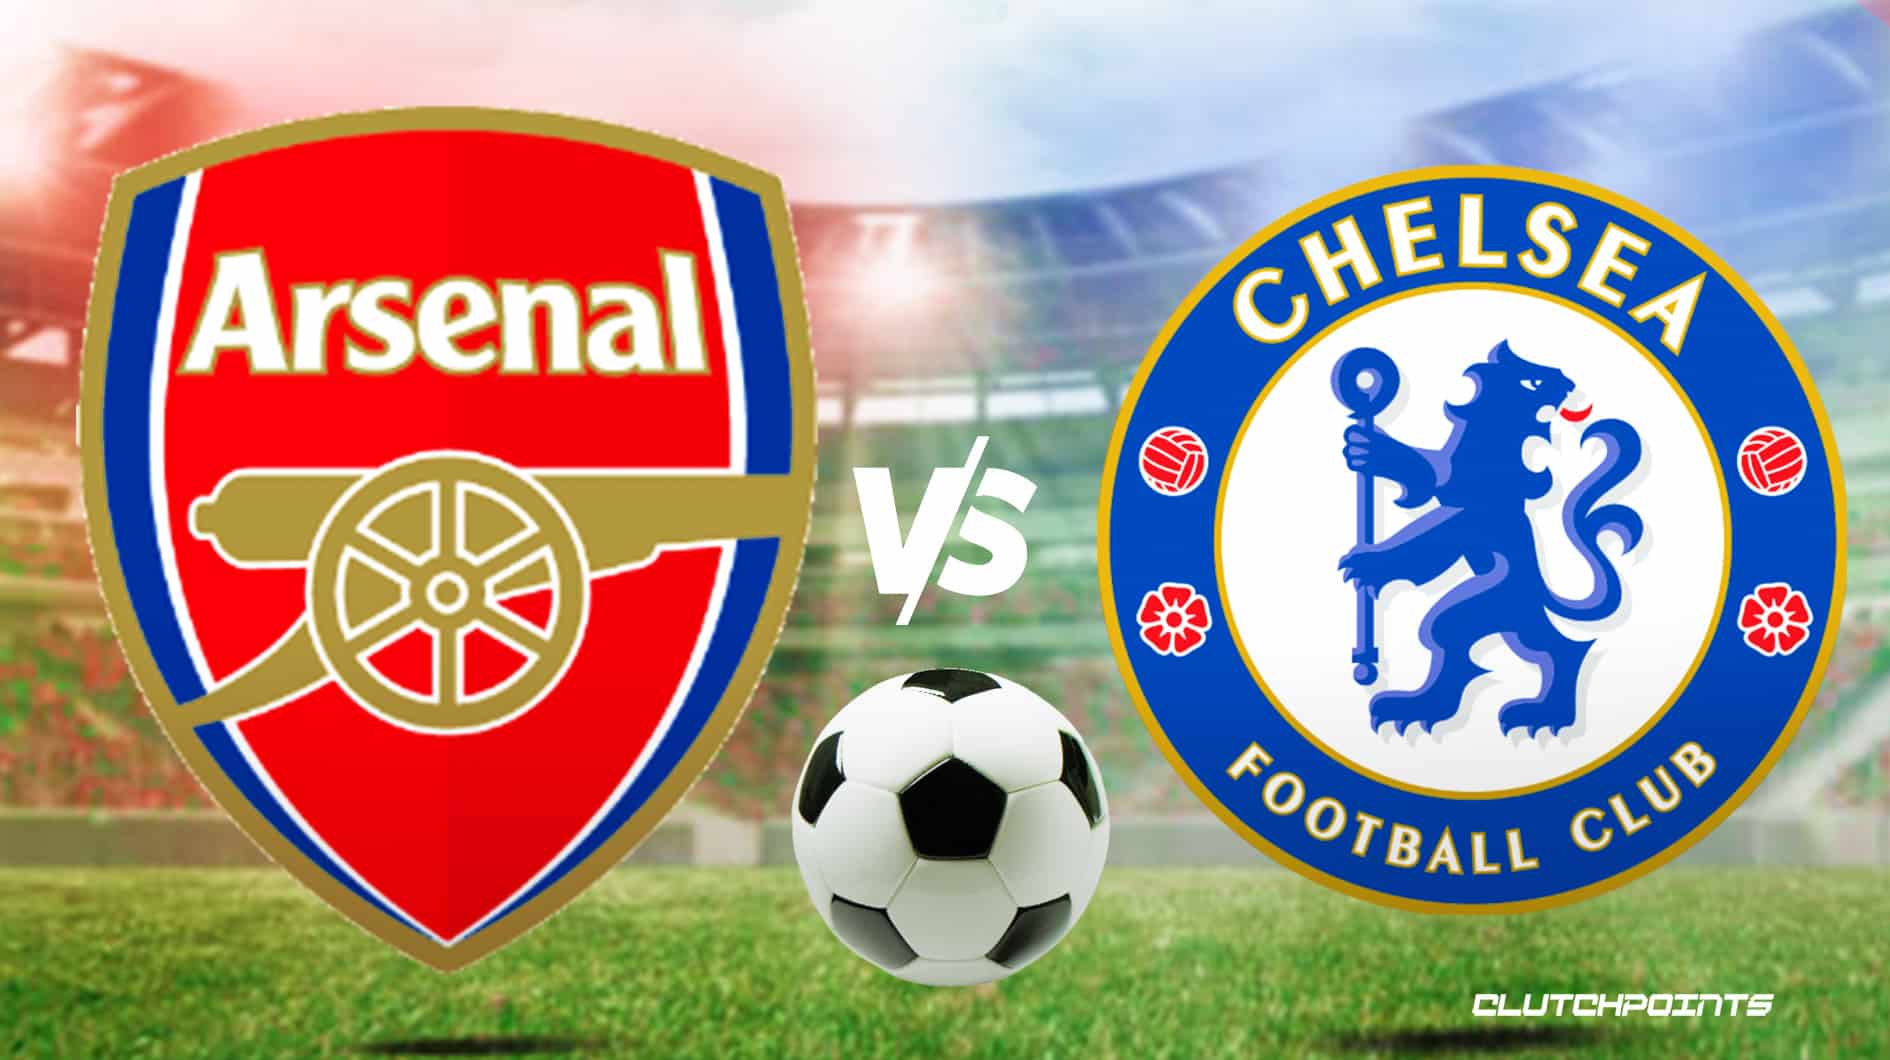 Premier League Odds: Arsenal vs Chelsea prediction, pick, how to watch